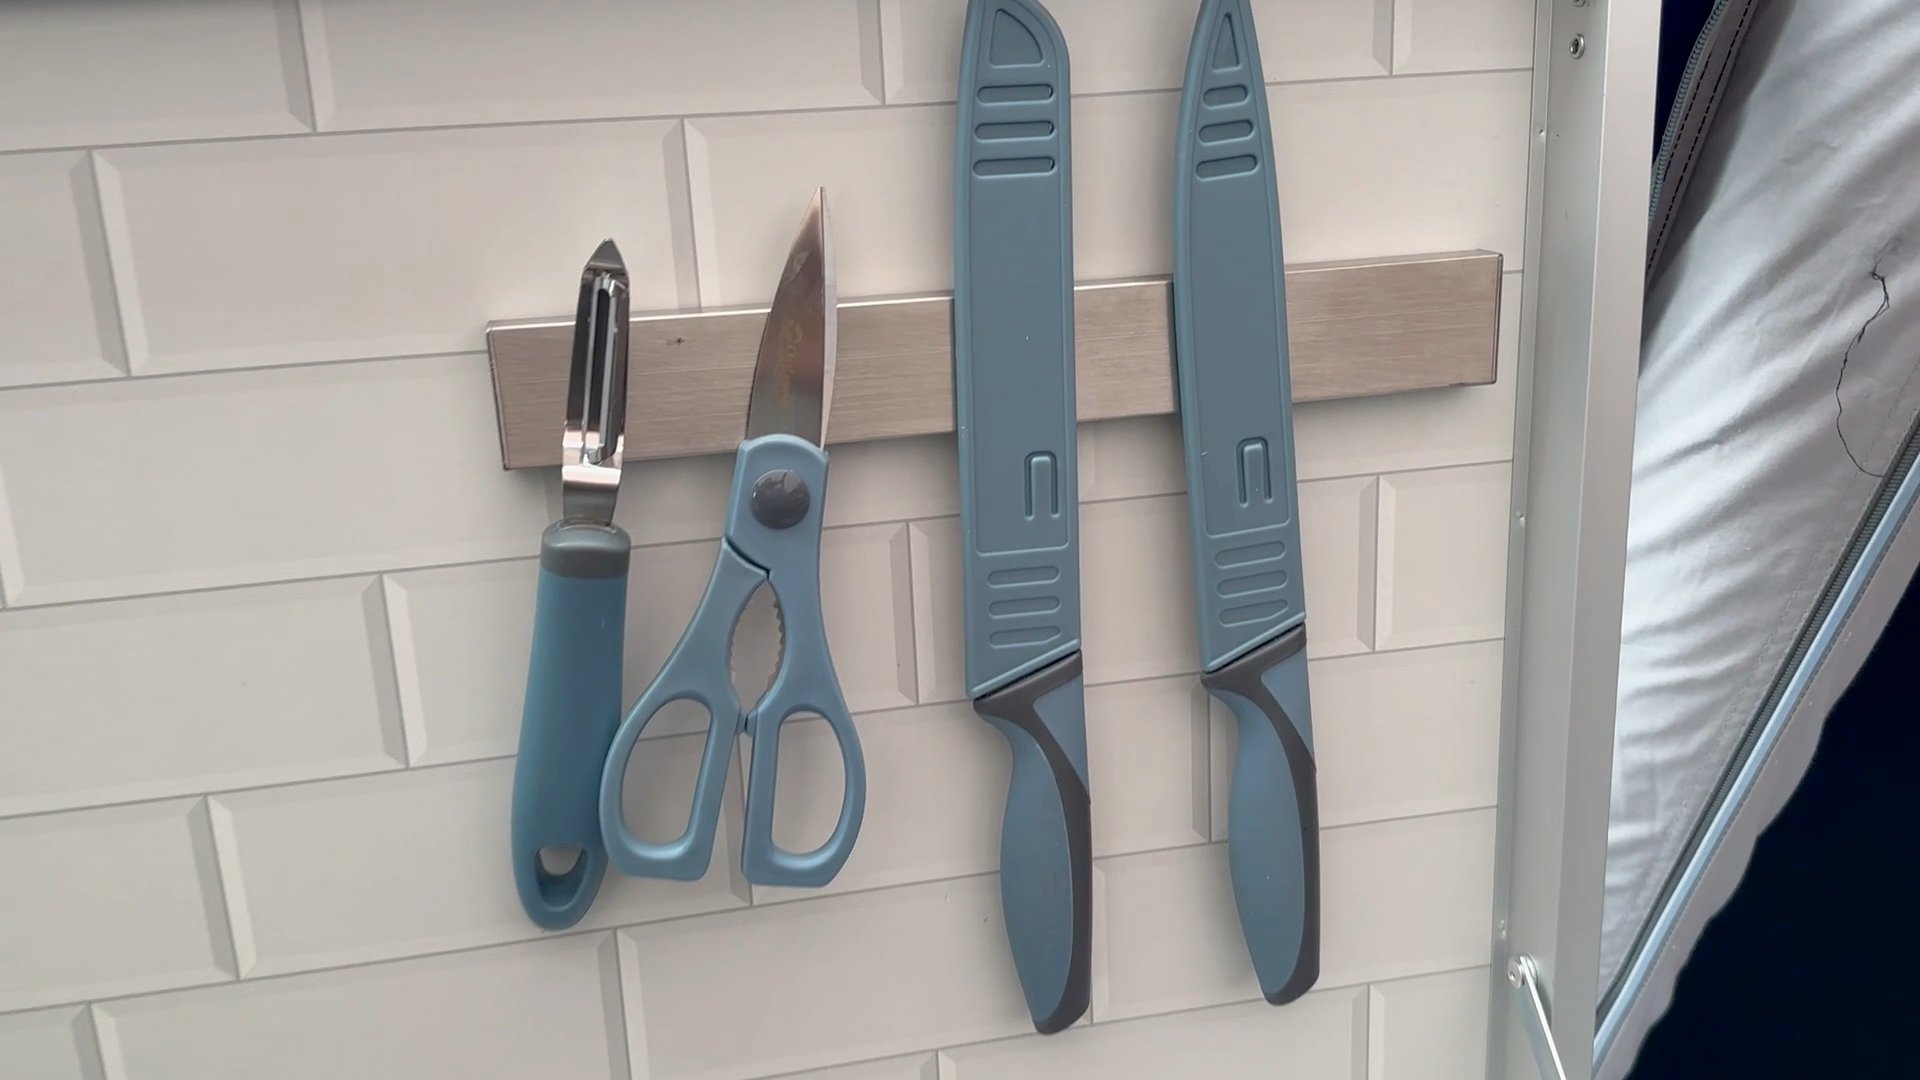 The magnetic knife holder, with Outwell knives